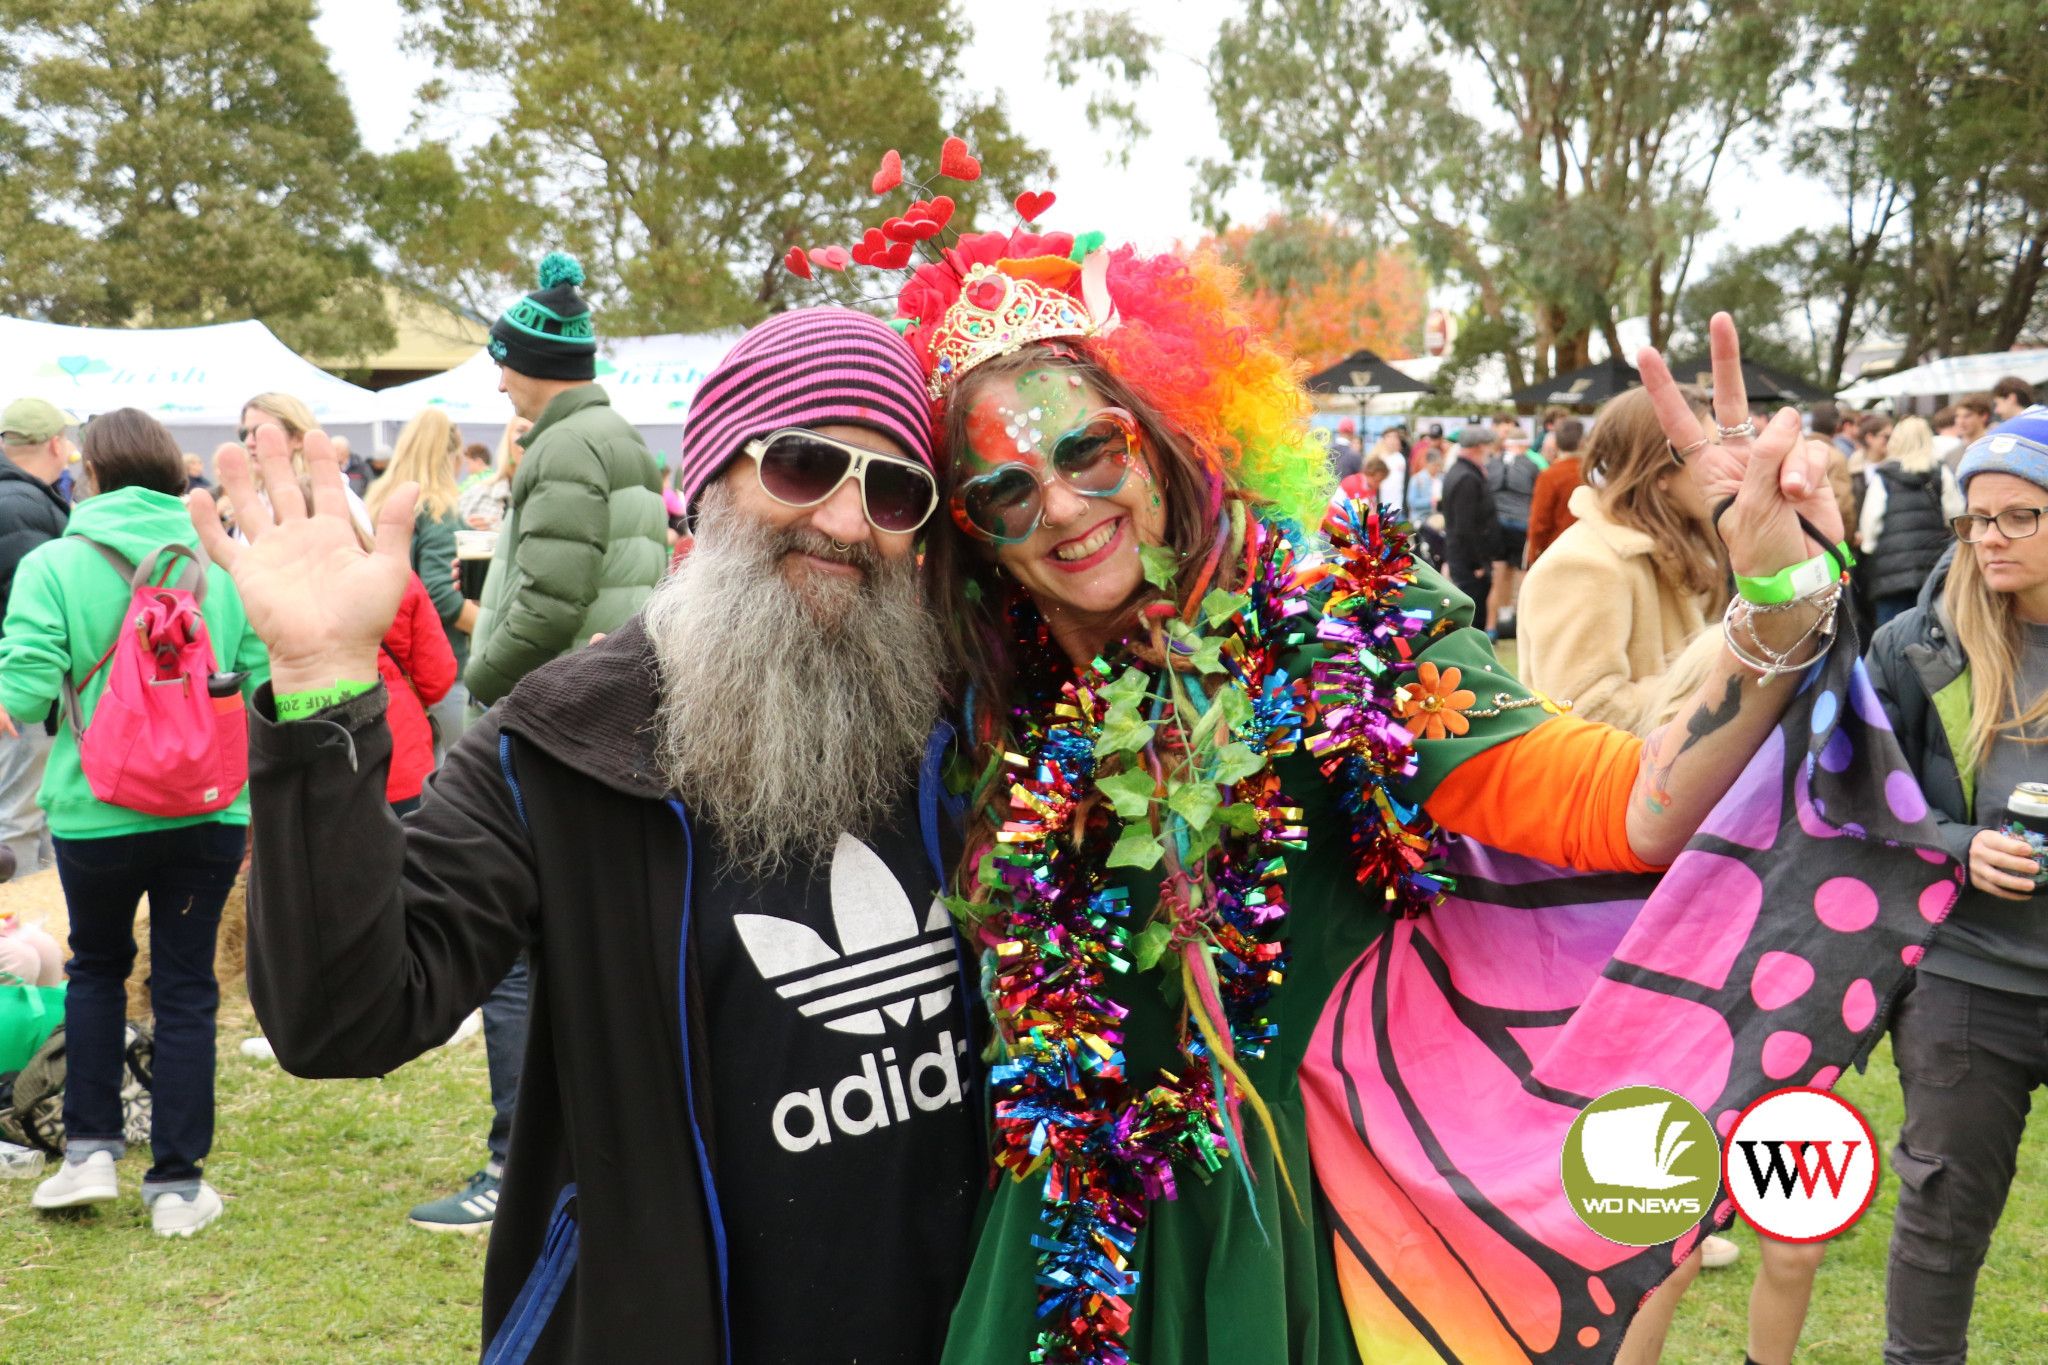 Visitors from far and wide travelled to Koroit last weekend where they joined locals to celebrate ‘all things Irish.’ More than 5,000 people are estimated to have enjoyed the annual Koroit Irish Festival.